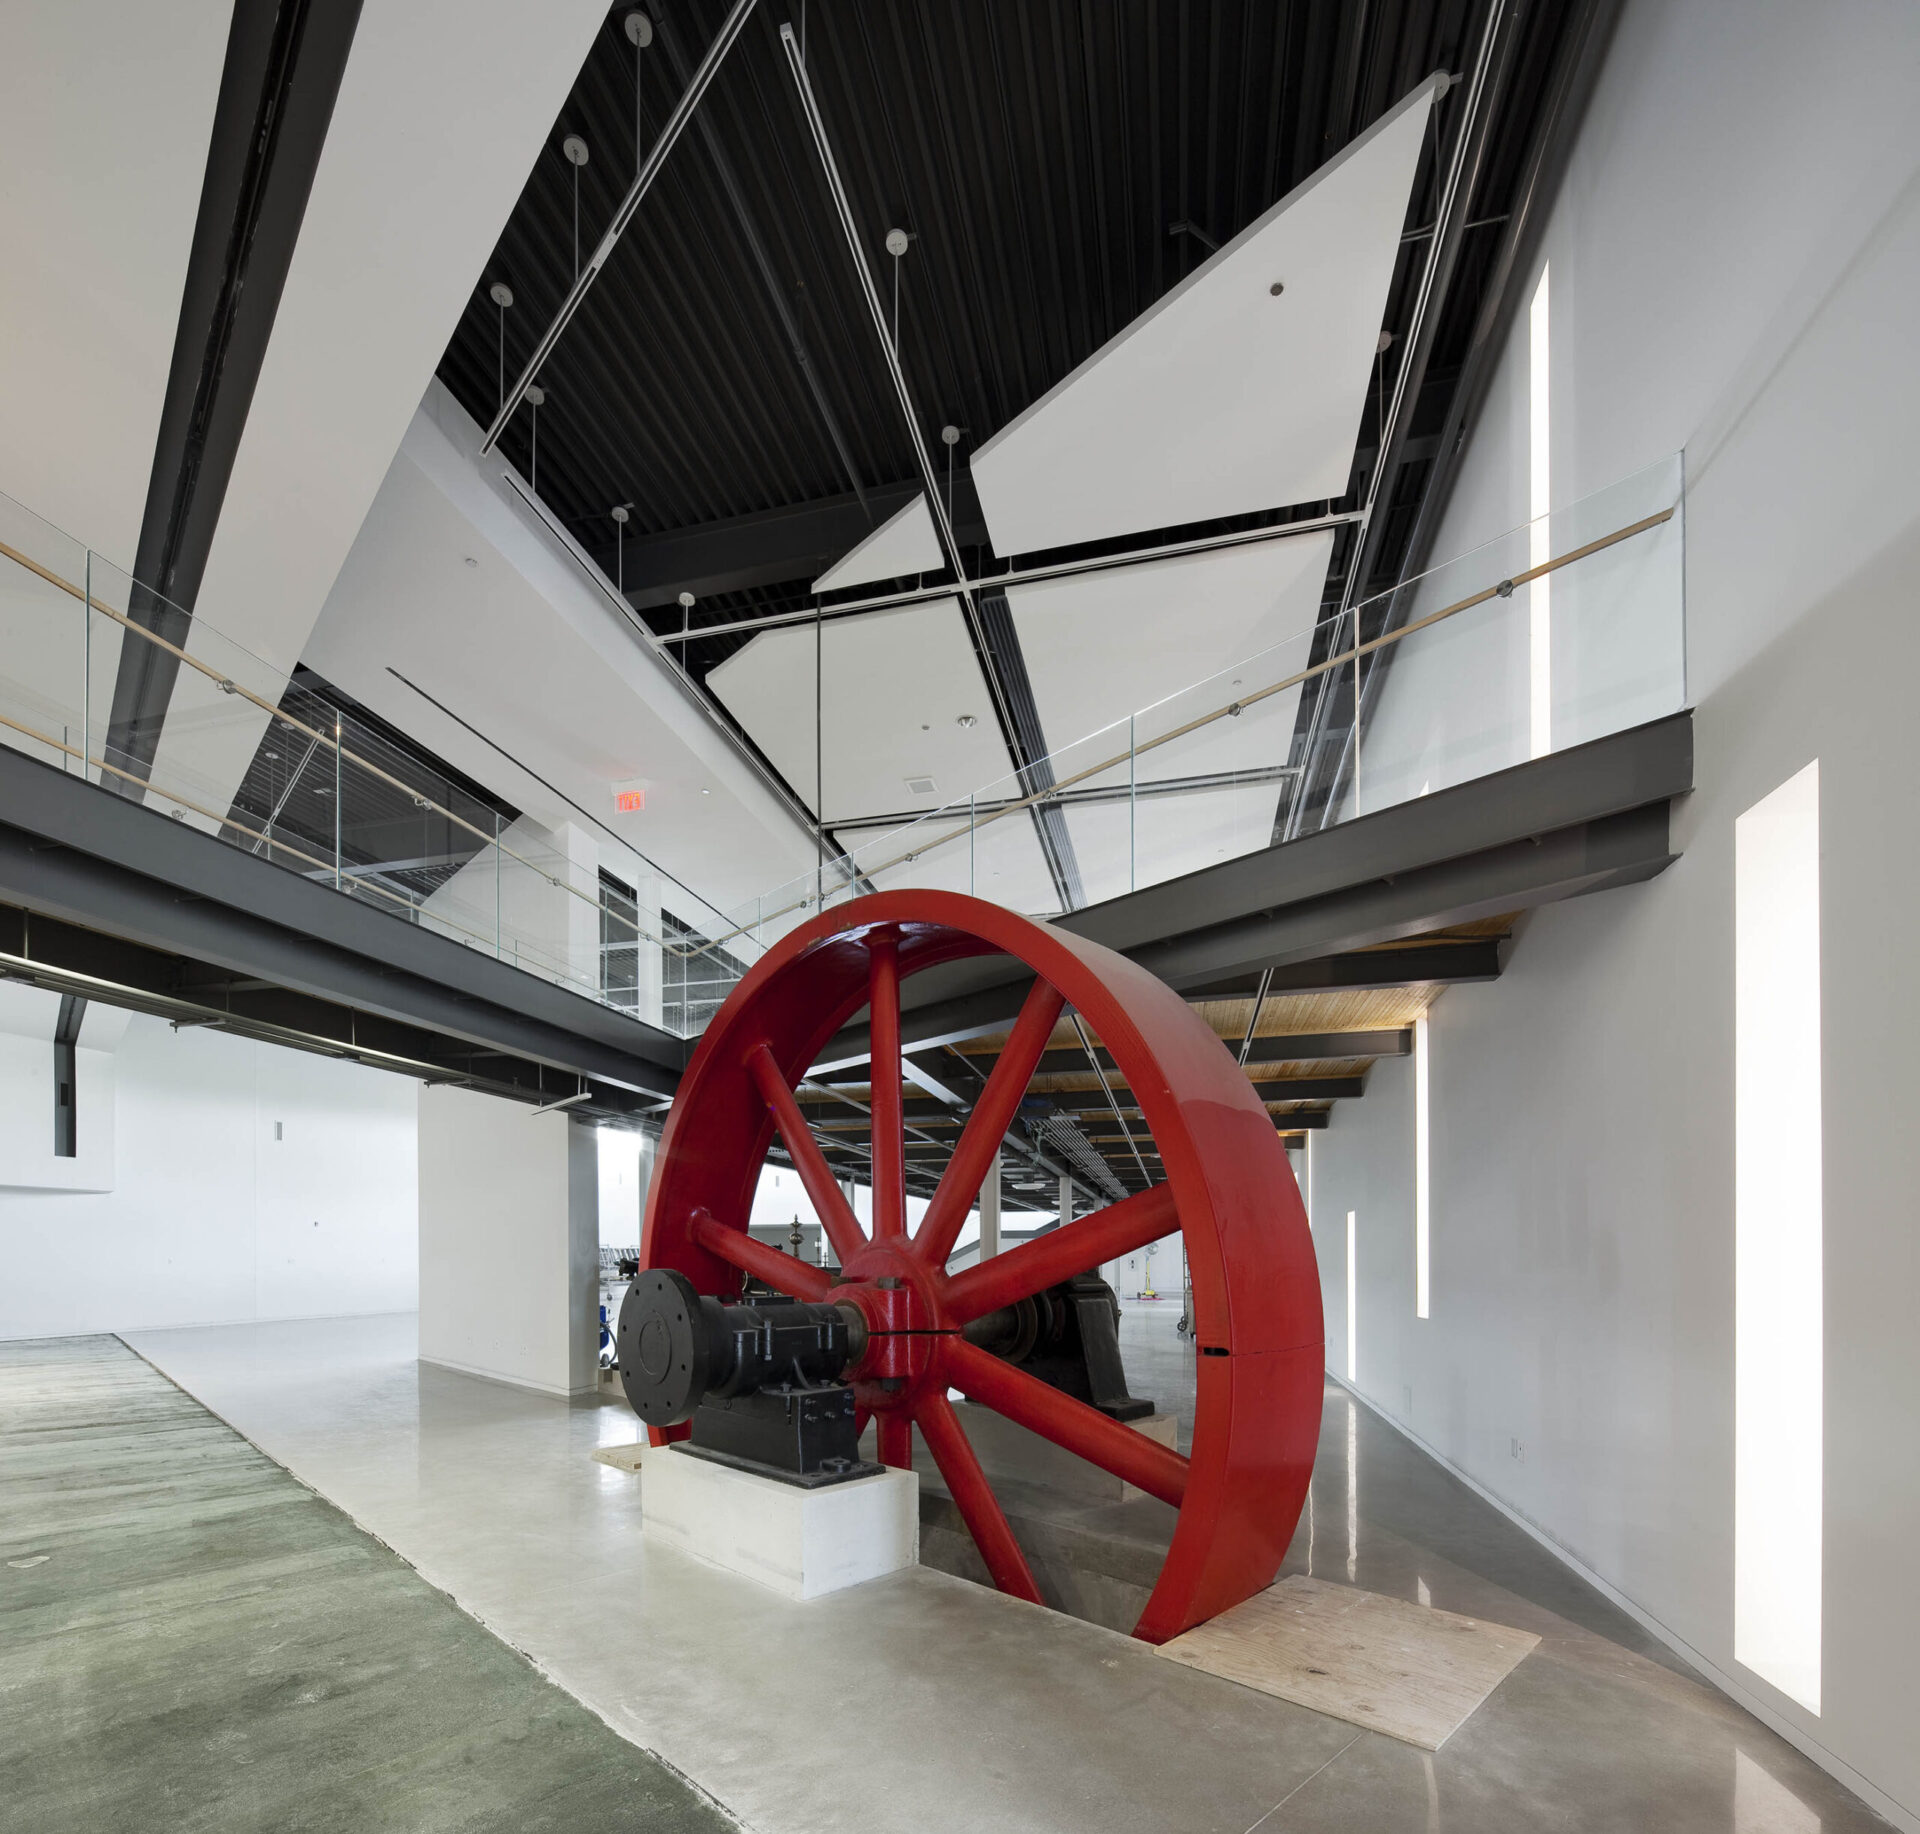 A large red wheel sits in the middle of an engineering room.